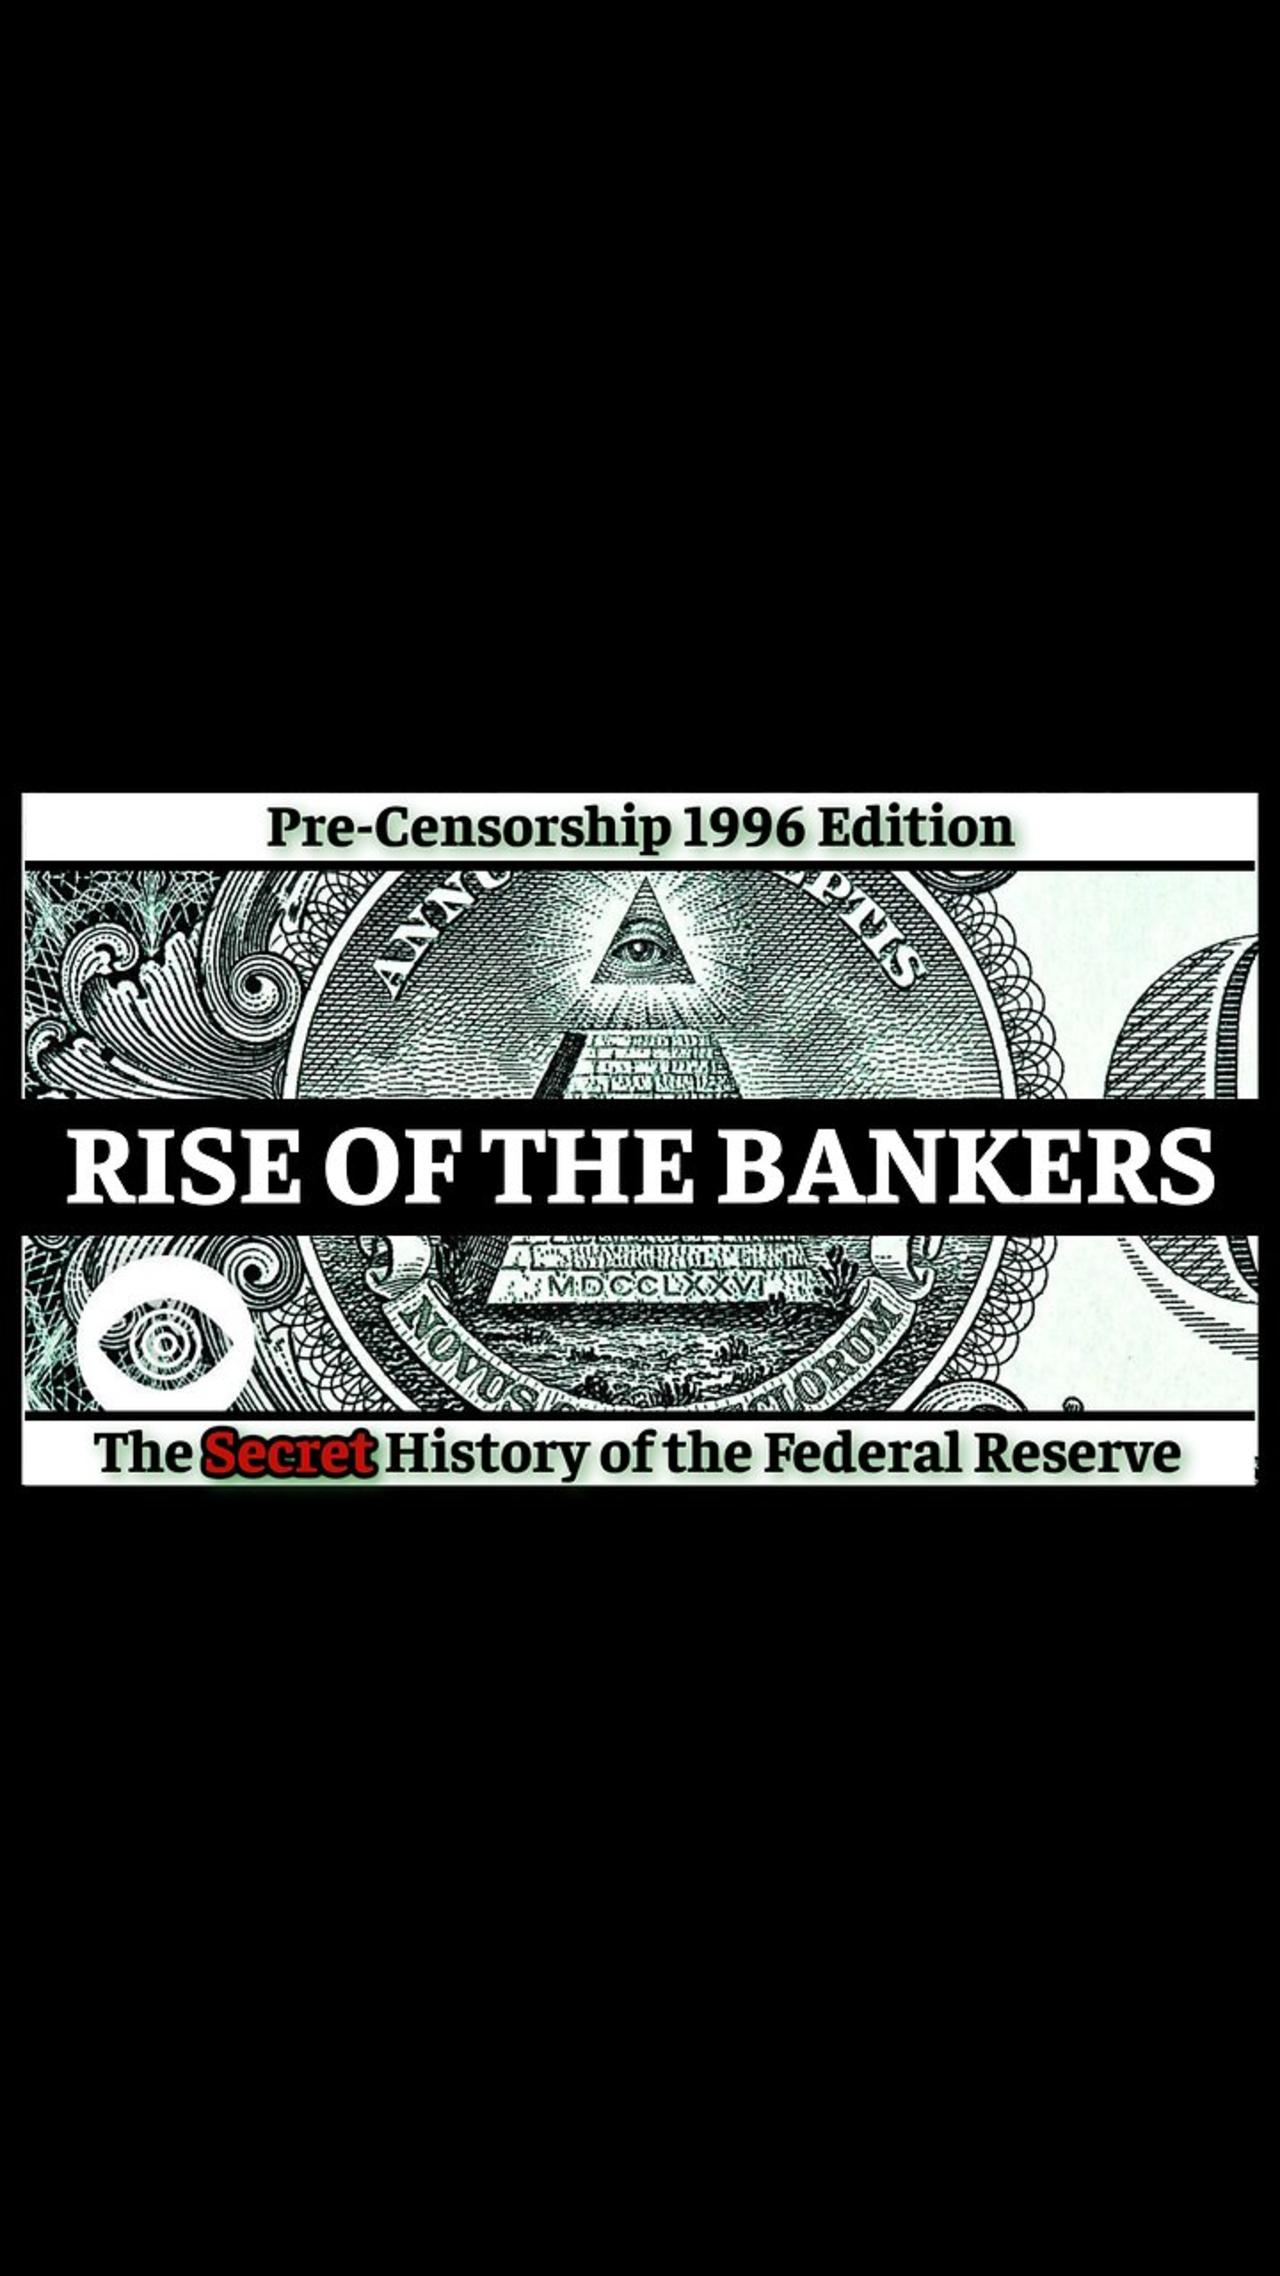 The Secret History of the Federal Reserve, Rothschilds, City of London, and Jekyll Island